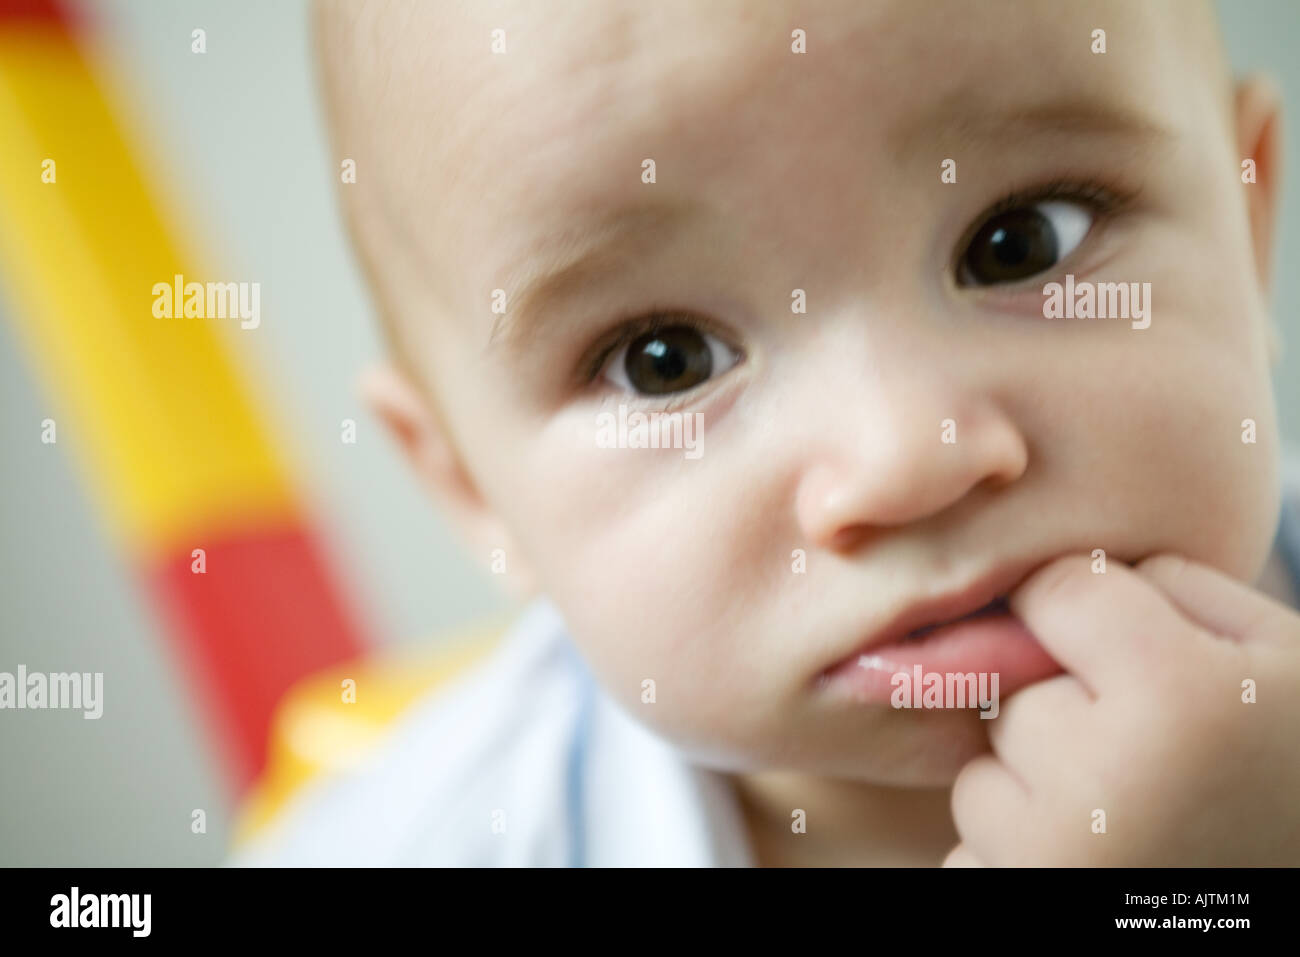 Baby with finger in mouth, close-up Stock Photo